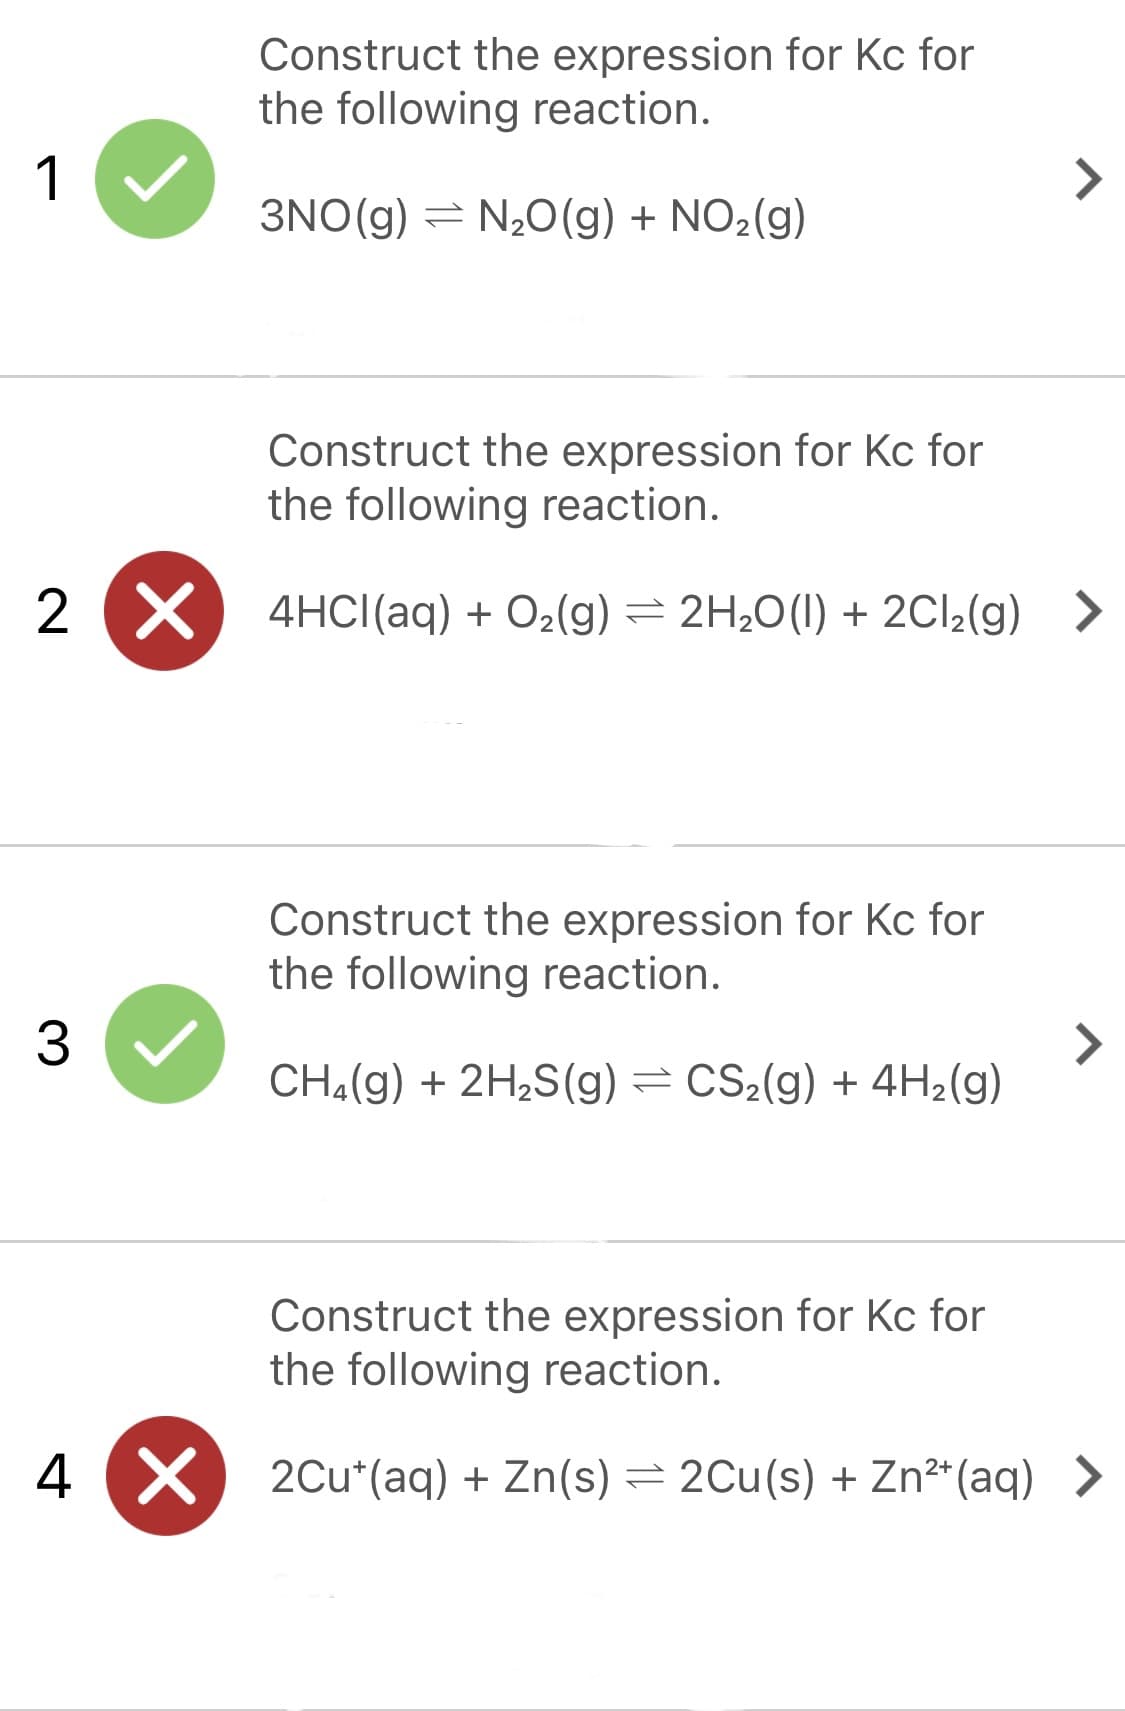 Construct the expression for Kc for
the following reaction.
1
<>
3NO(g) = N20(g) + NO2(g)
Construct the expression for Kc for
the following reaction.
2 X
4HCI(aq) + O2(g) = 2H20(1) + 2C12(g) >
Construct the expression for Kc for
the following reaction.
3
<>
CH4(g) + 2H2S(g) = CS2(g) + 4H2(g)
Construct the expression for Kc for
the following reaction.
4 X
2Cu*(aq) + Zn(s) = 2Cu(s) + Zn²*(aq) >
